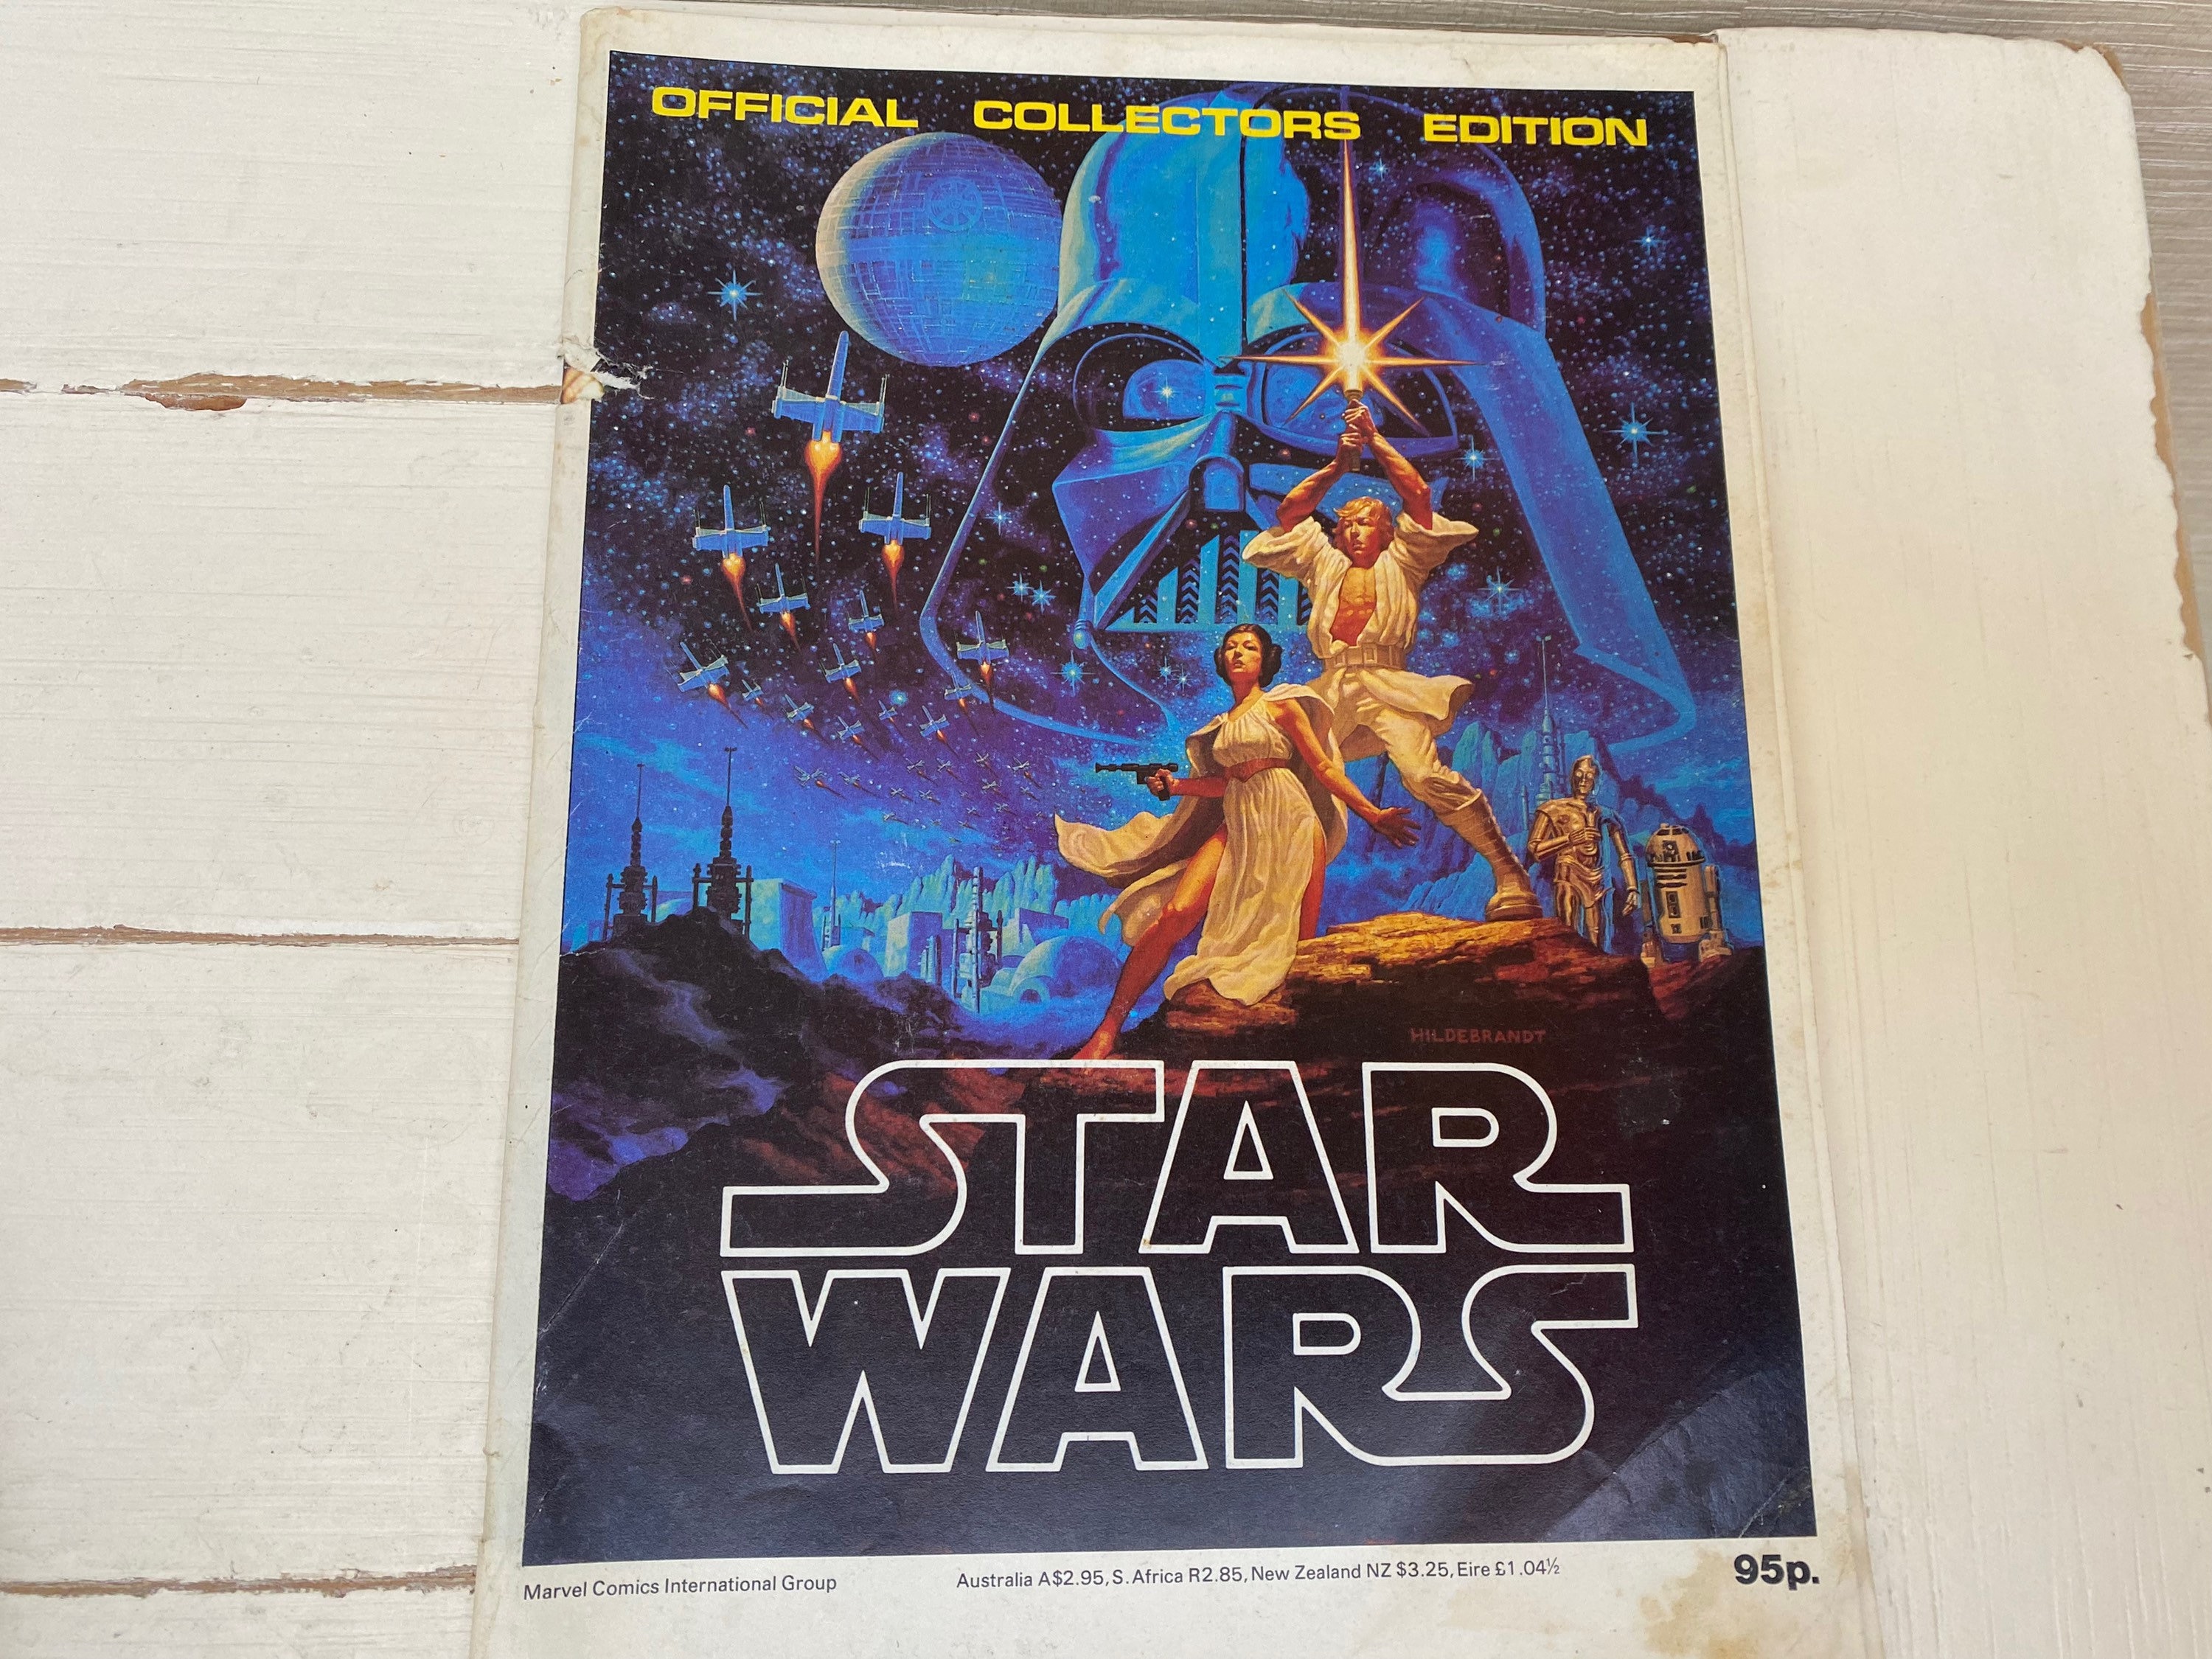 Star Wars Collector's Guide to Out-of-This-World Memorabilia